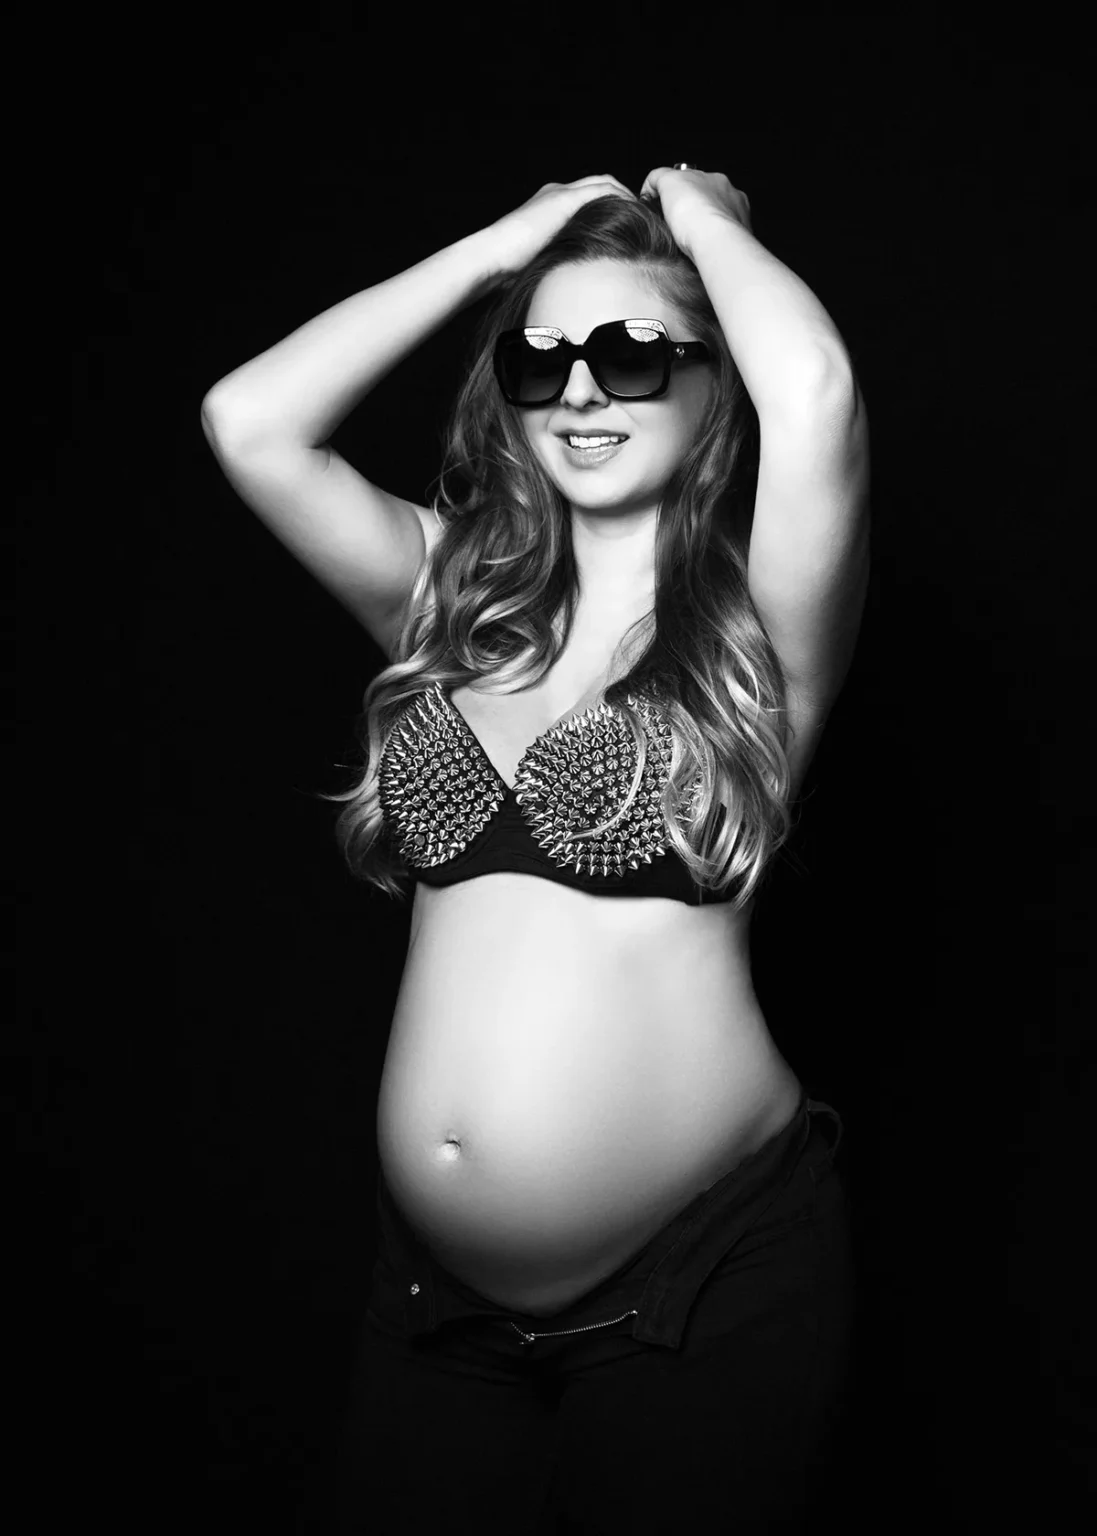 Where to Buy Cute Maternity Lingerie, Maternity Boudoir Photography